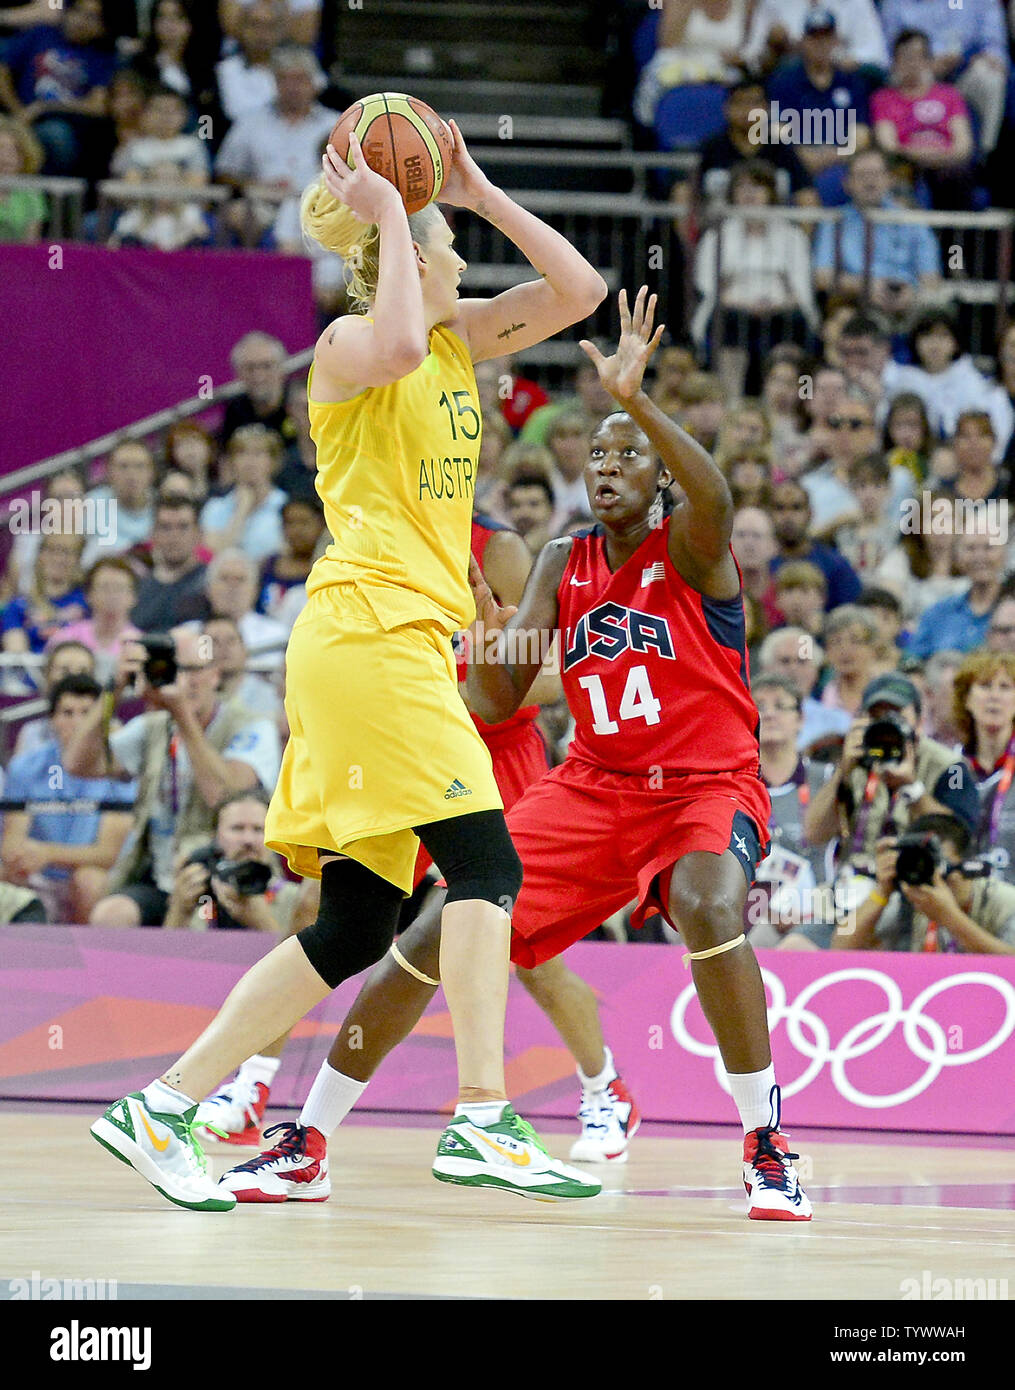 Forward/center Lauren Jackson (15) of Australia looks to pass the ball against center/forward Tina Charles (14) of the United States of America in the Women's Basketball semifinal at the London 2012 Summer Olympics on August 9, 2012 in London. The United States won the game 86 - 73 to advance to the finals.   UPI/Ron Sachs Stock Photo